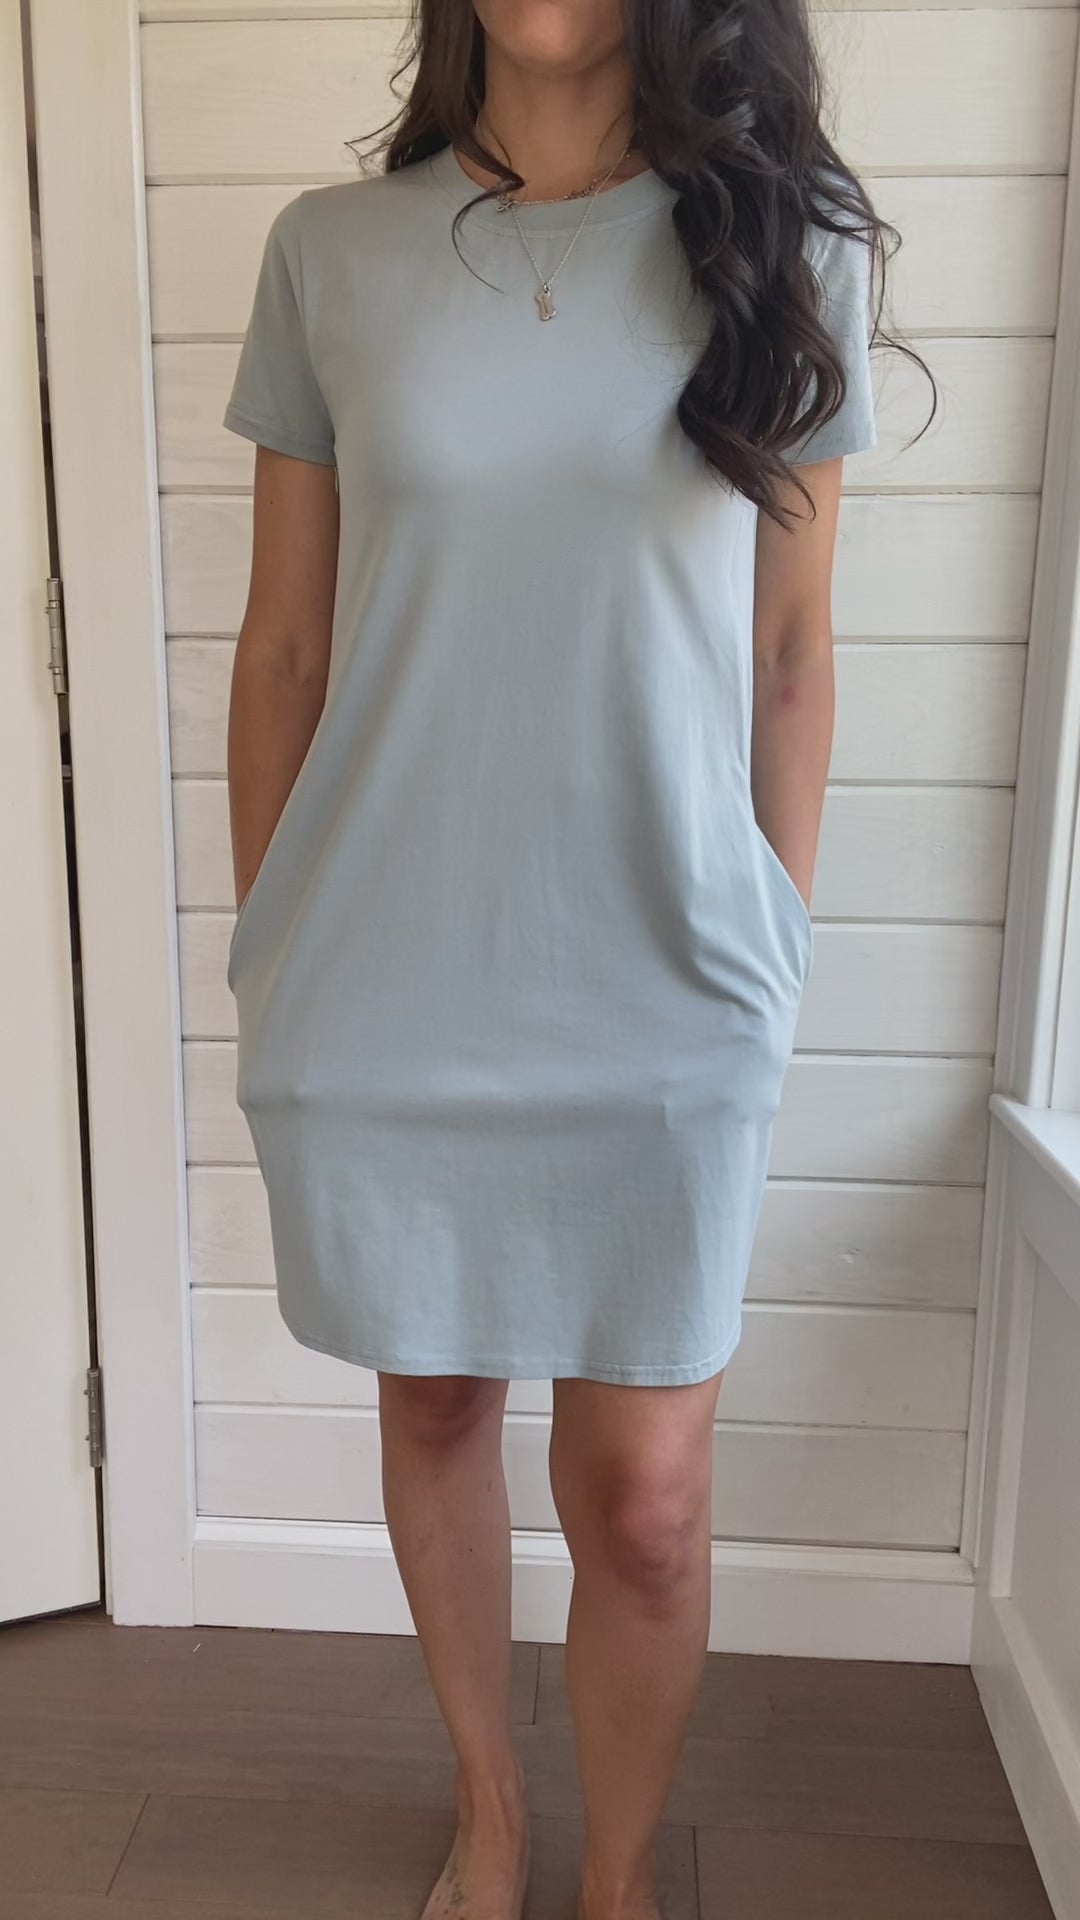 Breastfeeding T-Shirt Dress in light blue Video of model showing how to unzip and zip back up, pocket usage.. Two Zippers on right and left side to provide accessibility to nursing mothers. Pockets, rounded hem with two small slits on either side. T-Shirt Style dress perfect to nurse your child in.